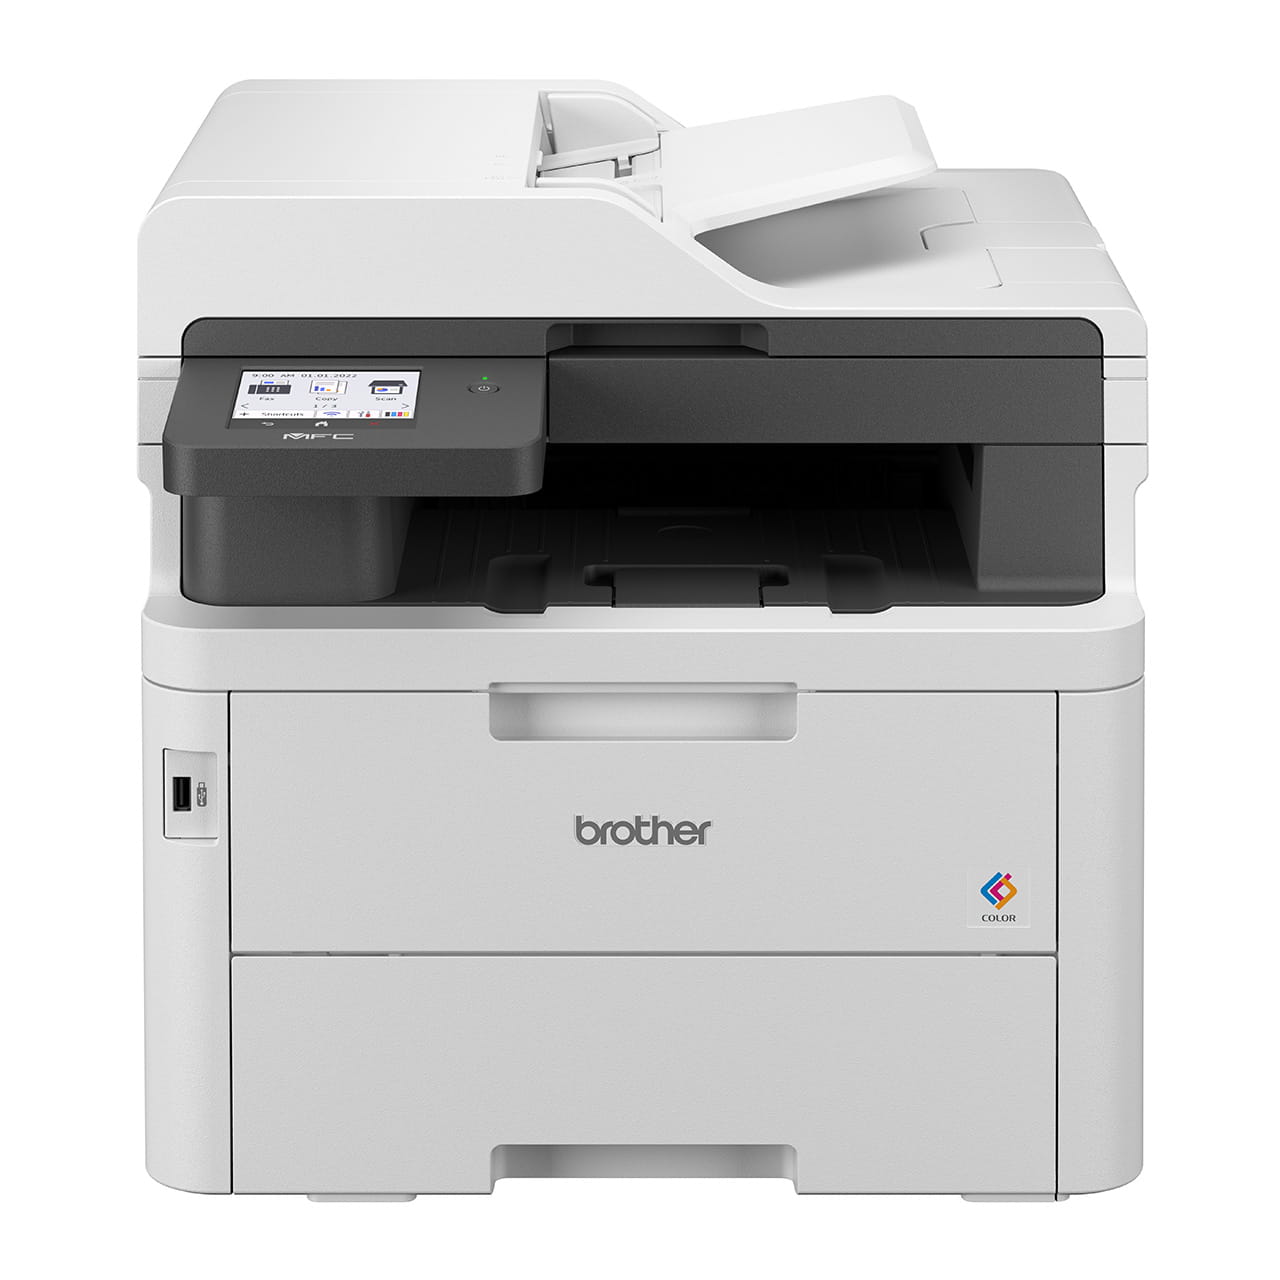 Brother MFC-L3760CDW Colour Laser Printer Front View